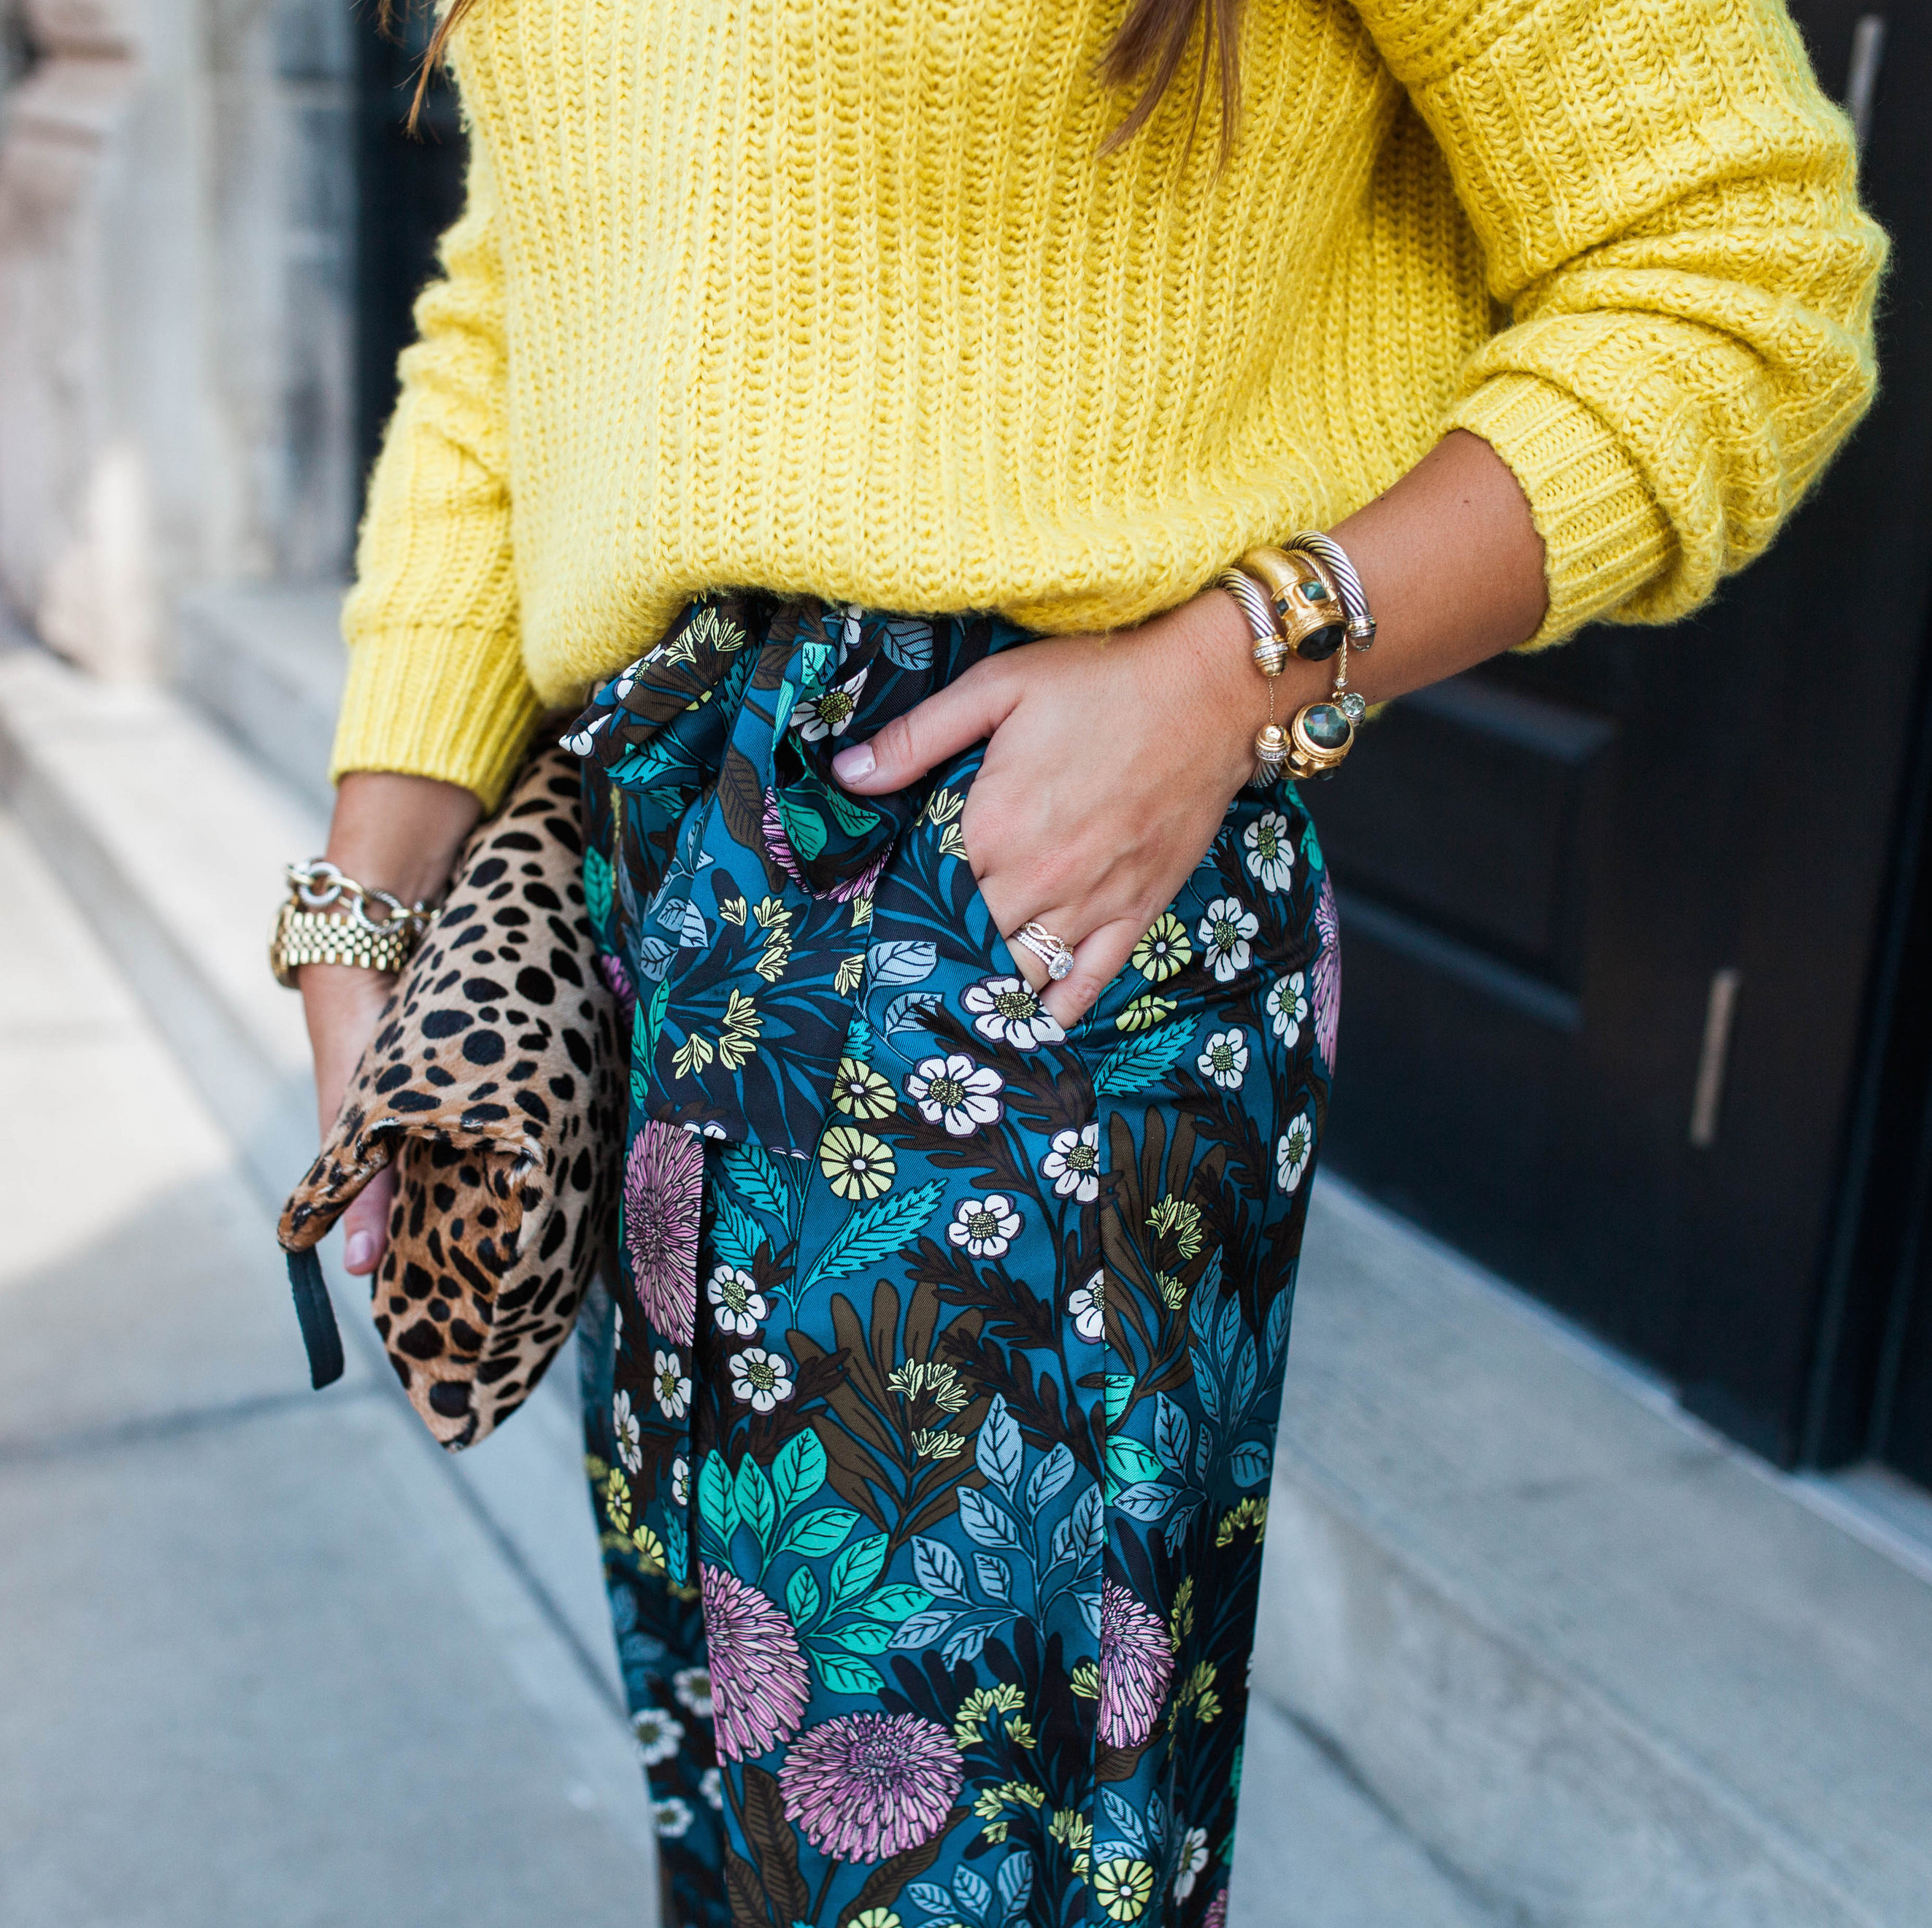 Floral Pants for Fall / A pop of color for fall